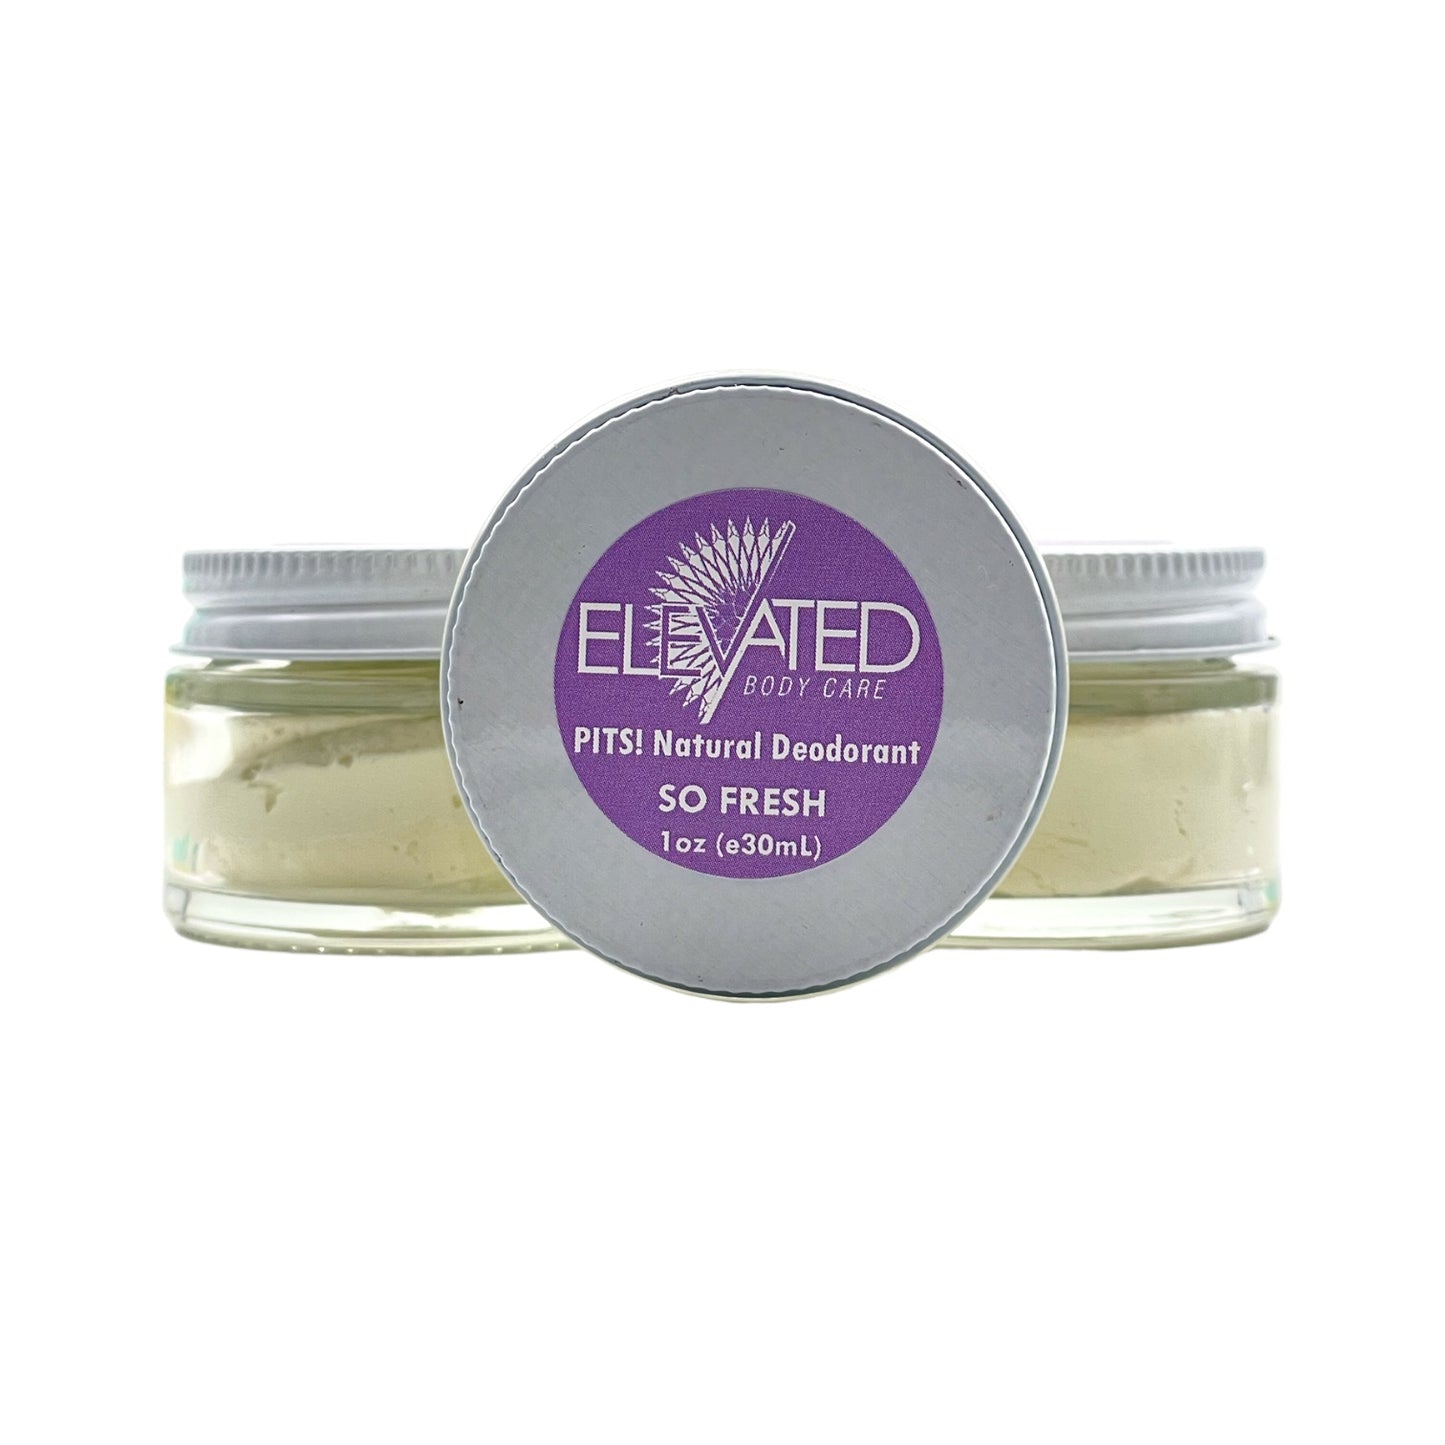 ELEVATED - PITS! Natural Deodorant - SAMPLE size 1oz